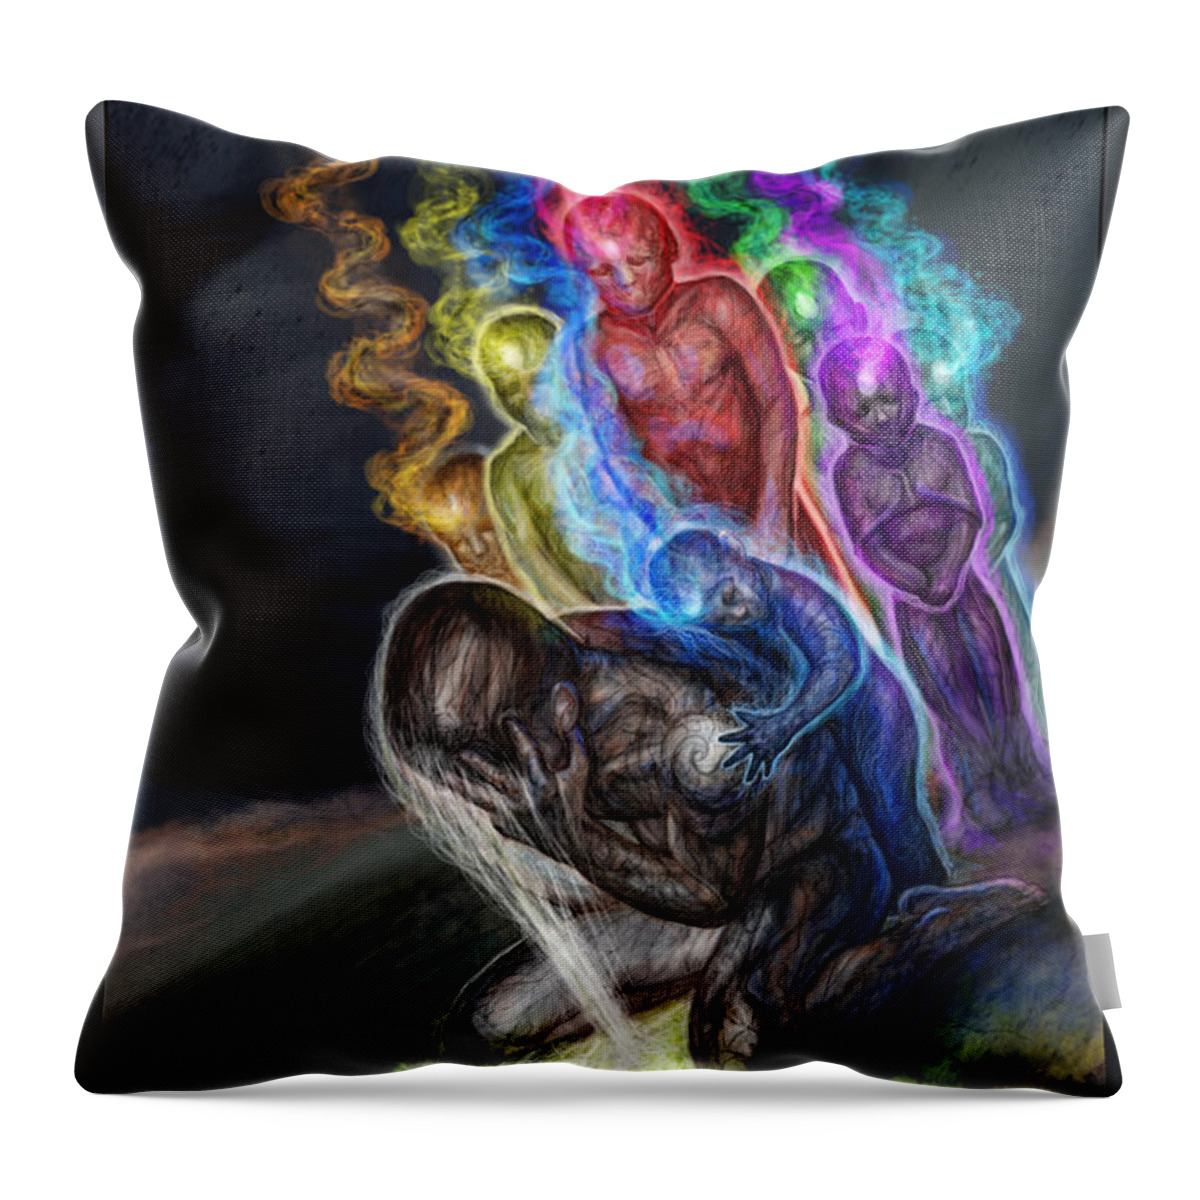 Tonykoehl Throw Pillow featuring the mixed media Ur not alone by Tony Koehl